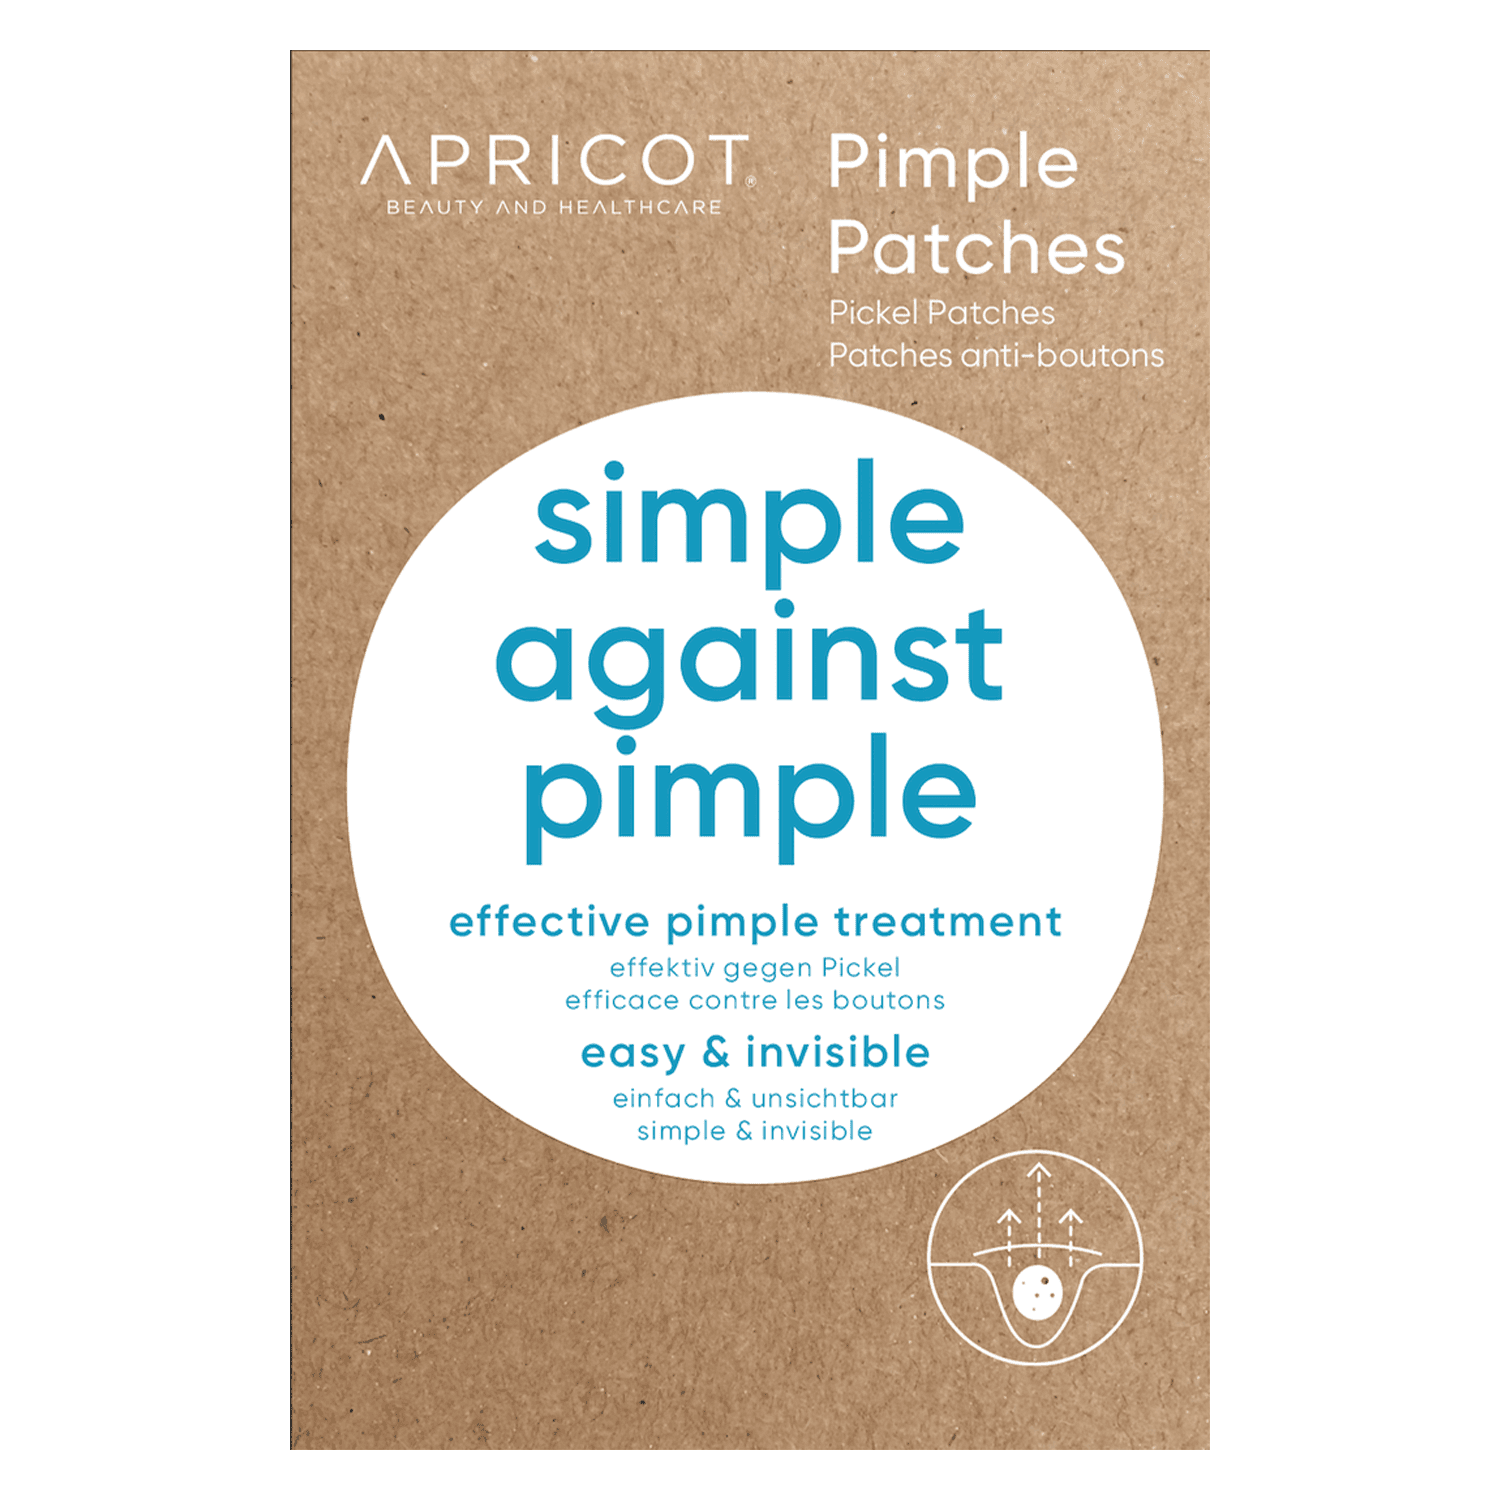 APRICOT - Hydrocolloid Pickel Patches Simple against Pimple